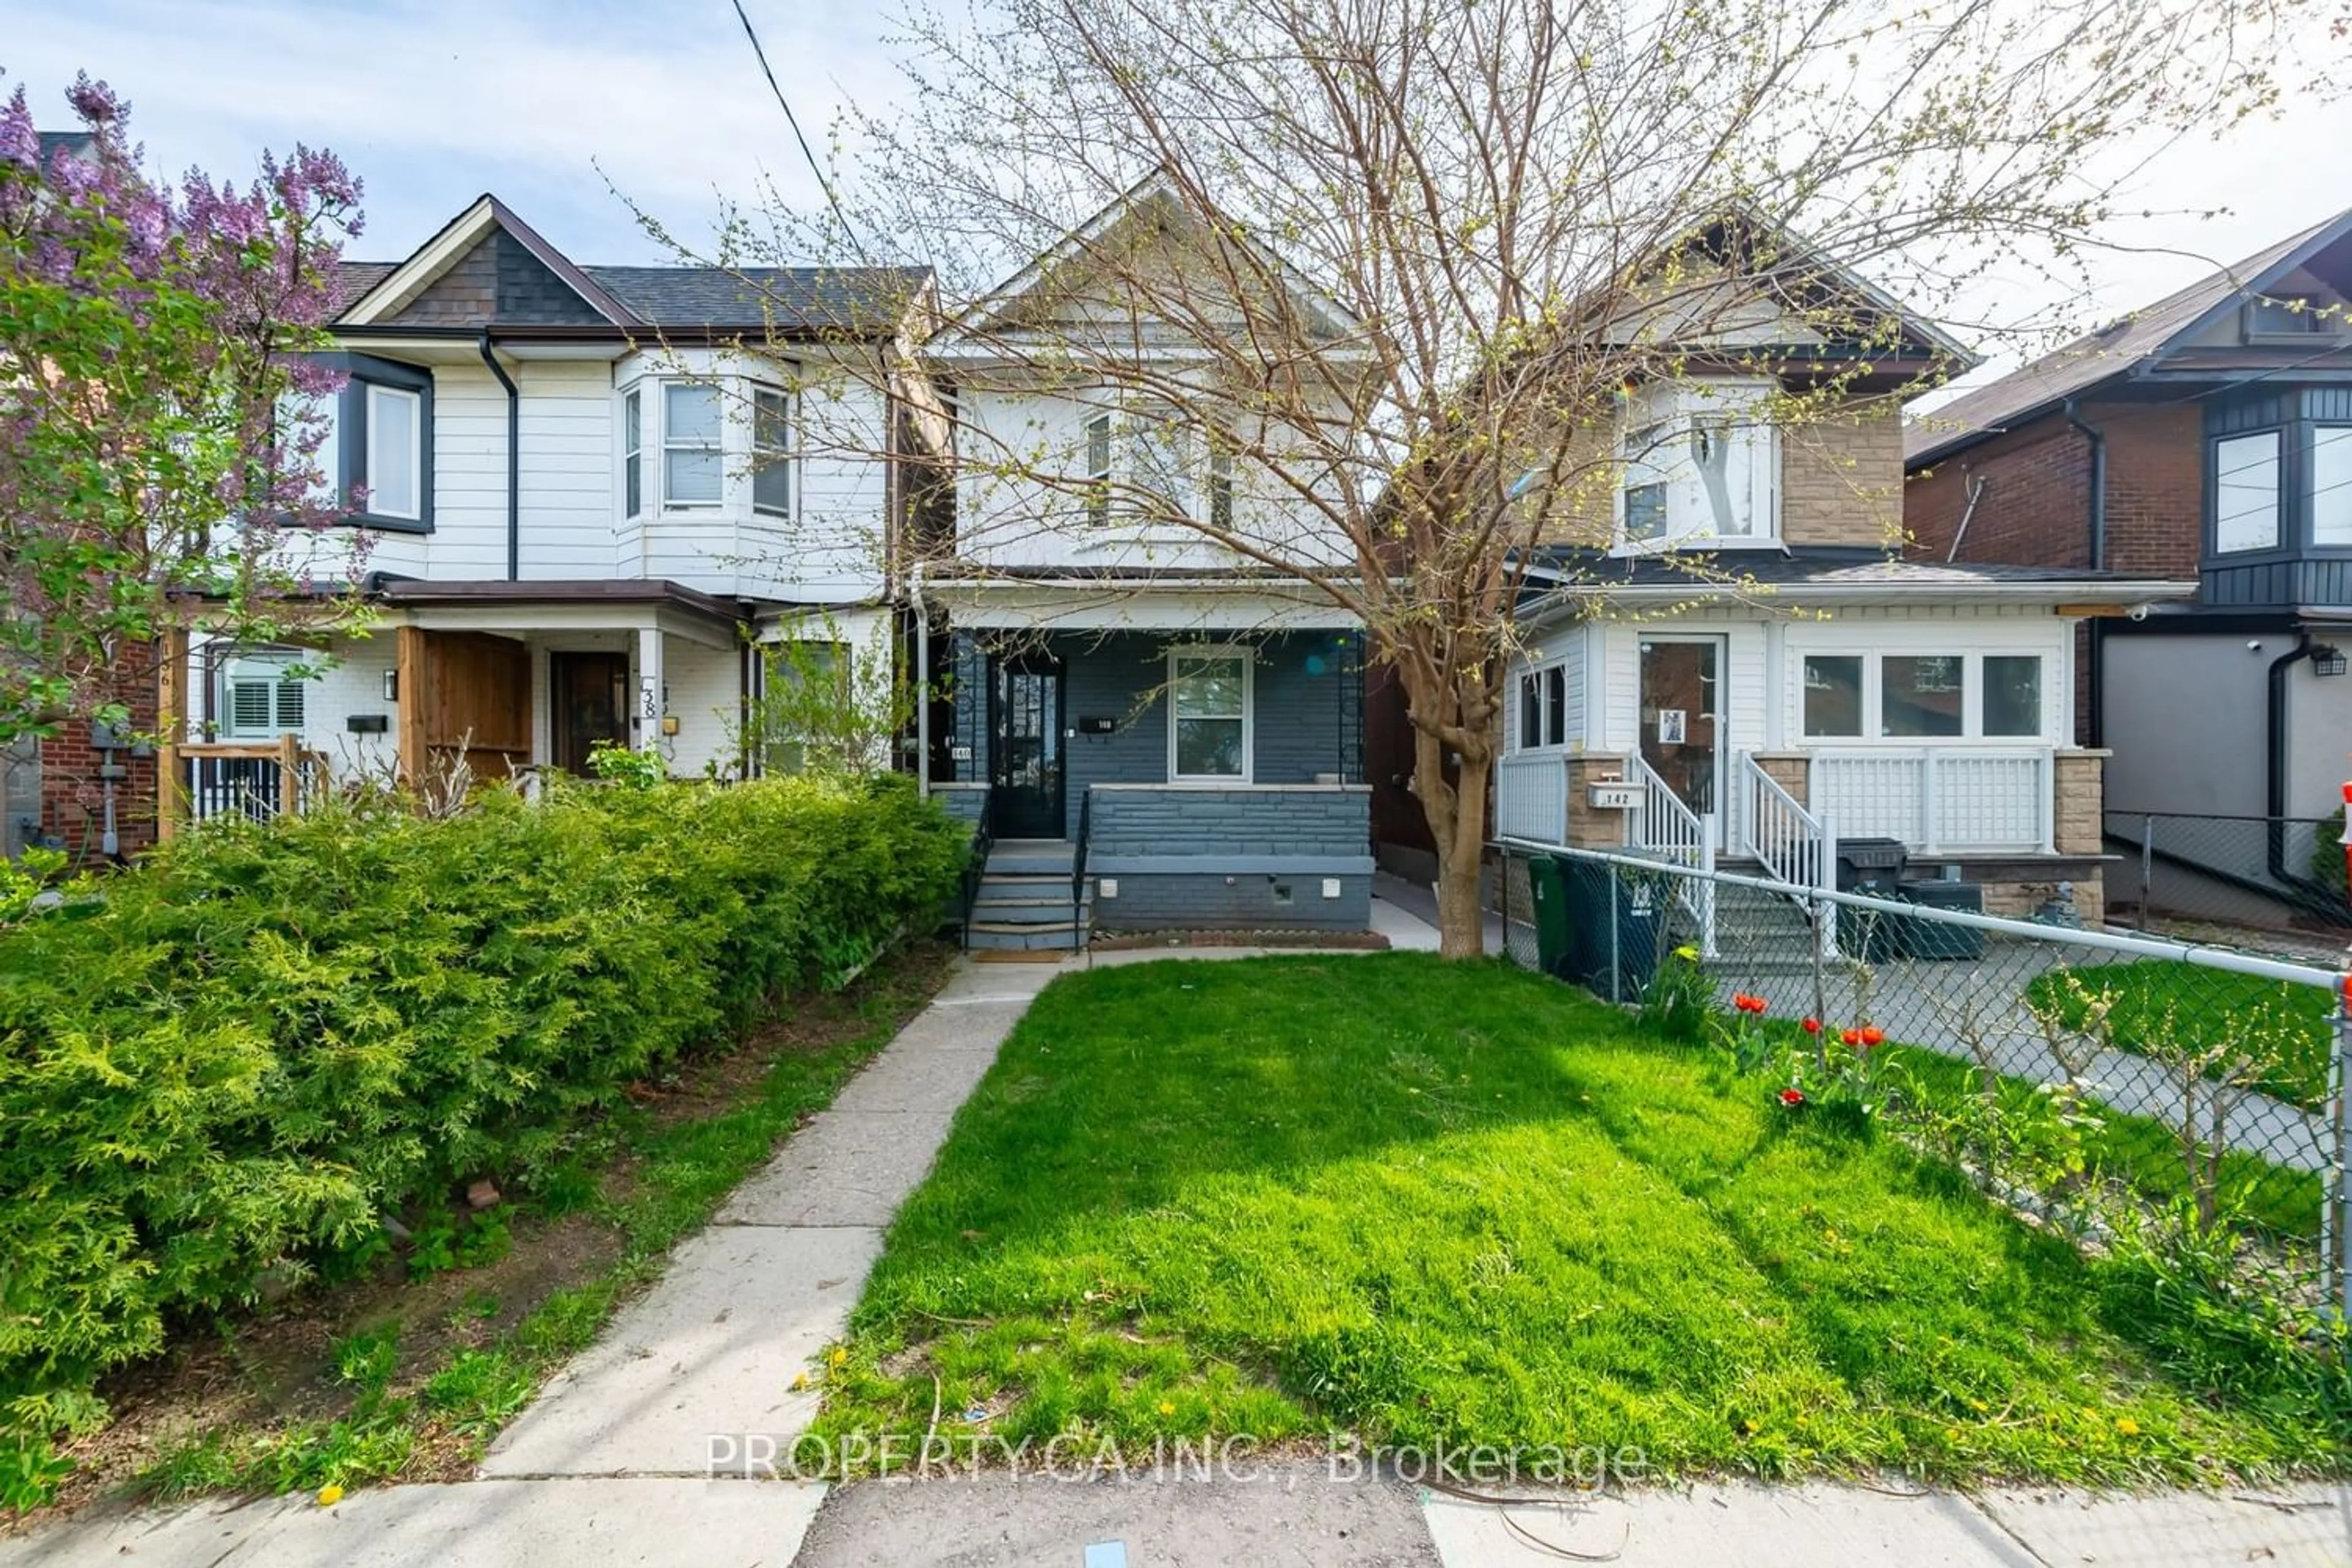 Frontside or backside of a home for 140 Brownville Ave, Toronto Ontario M6N 4L4